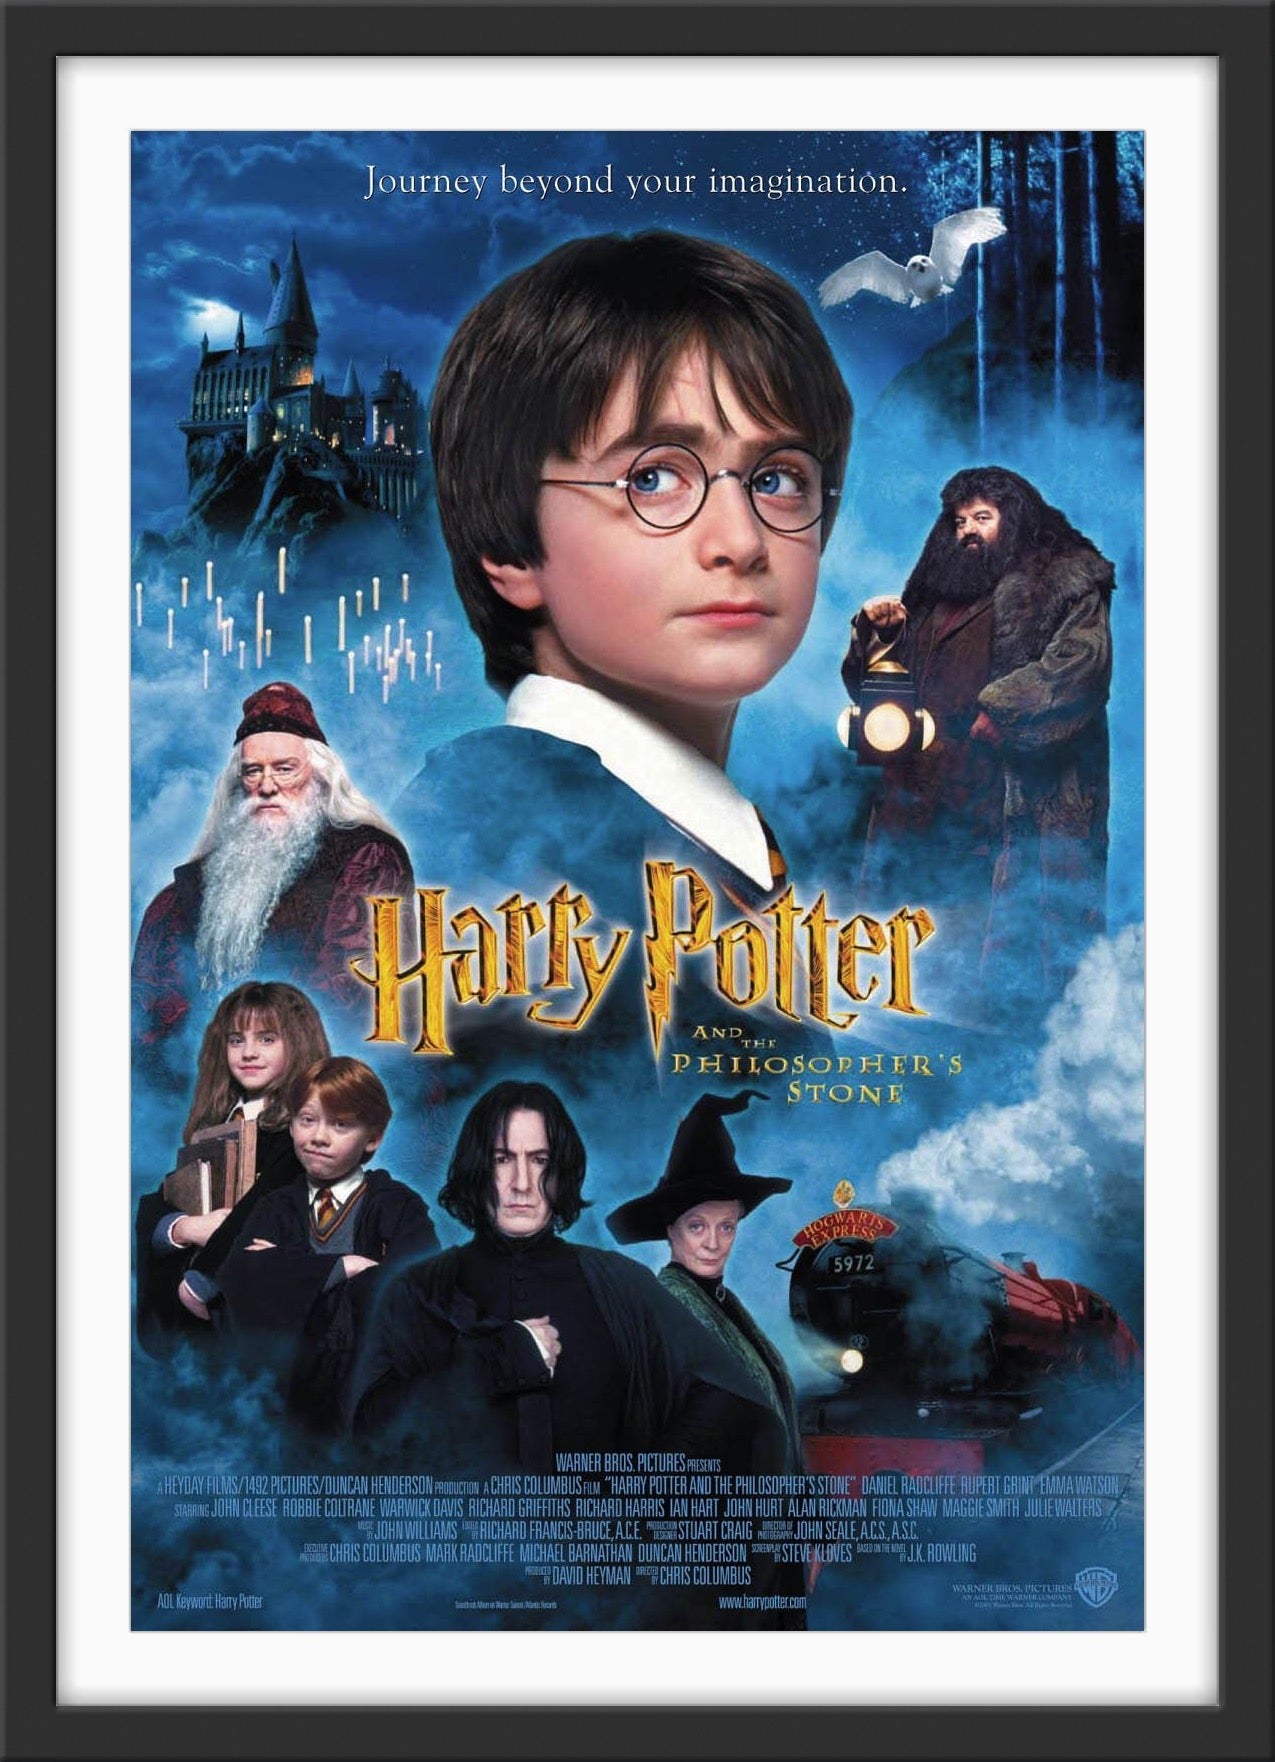 Harry Potter and the Philosopher's Stone - 2001